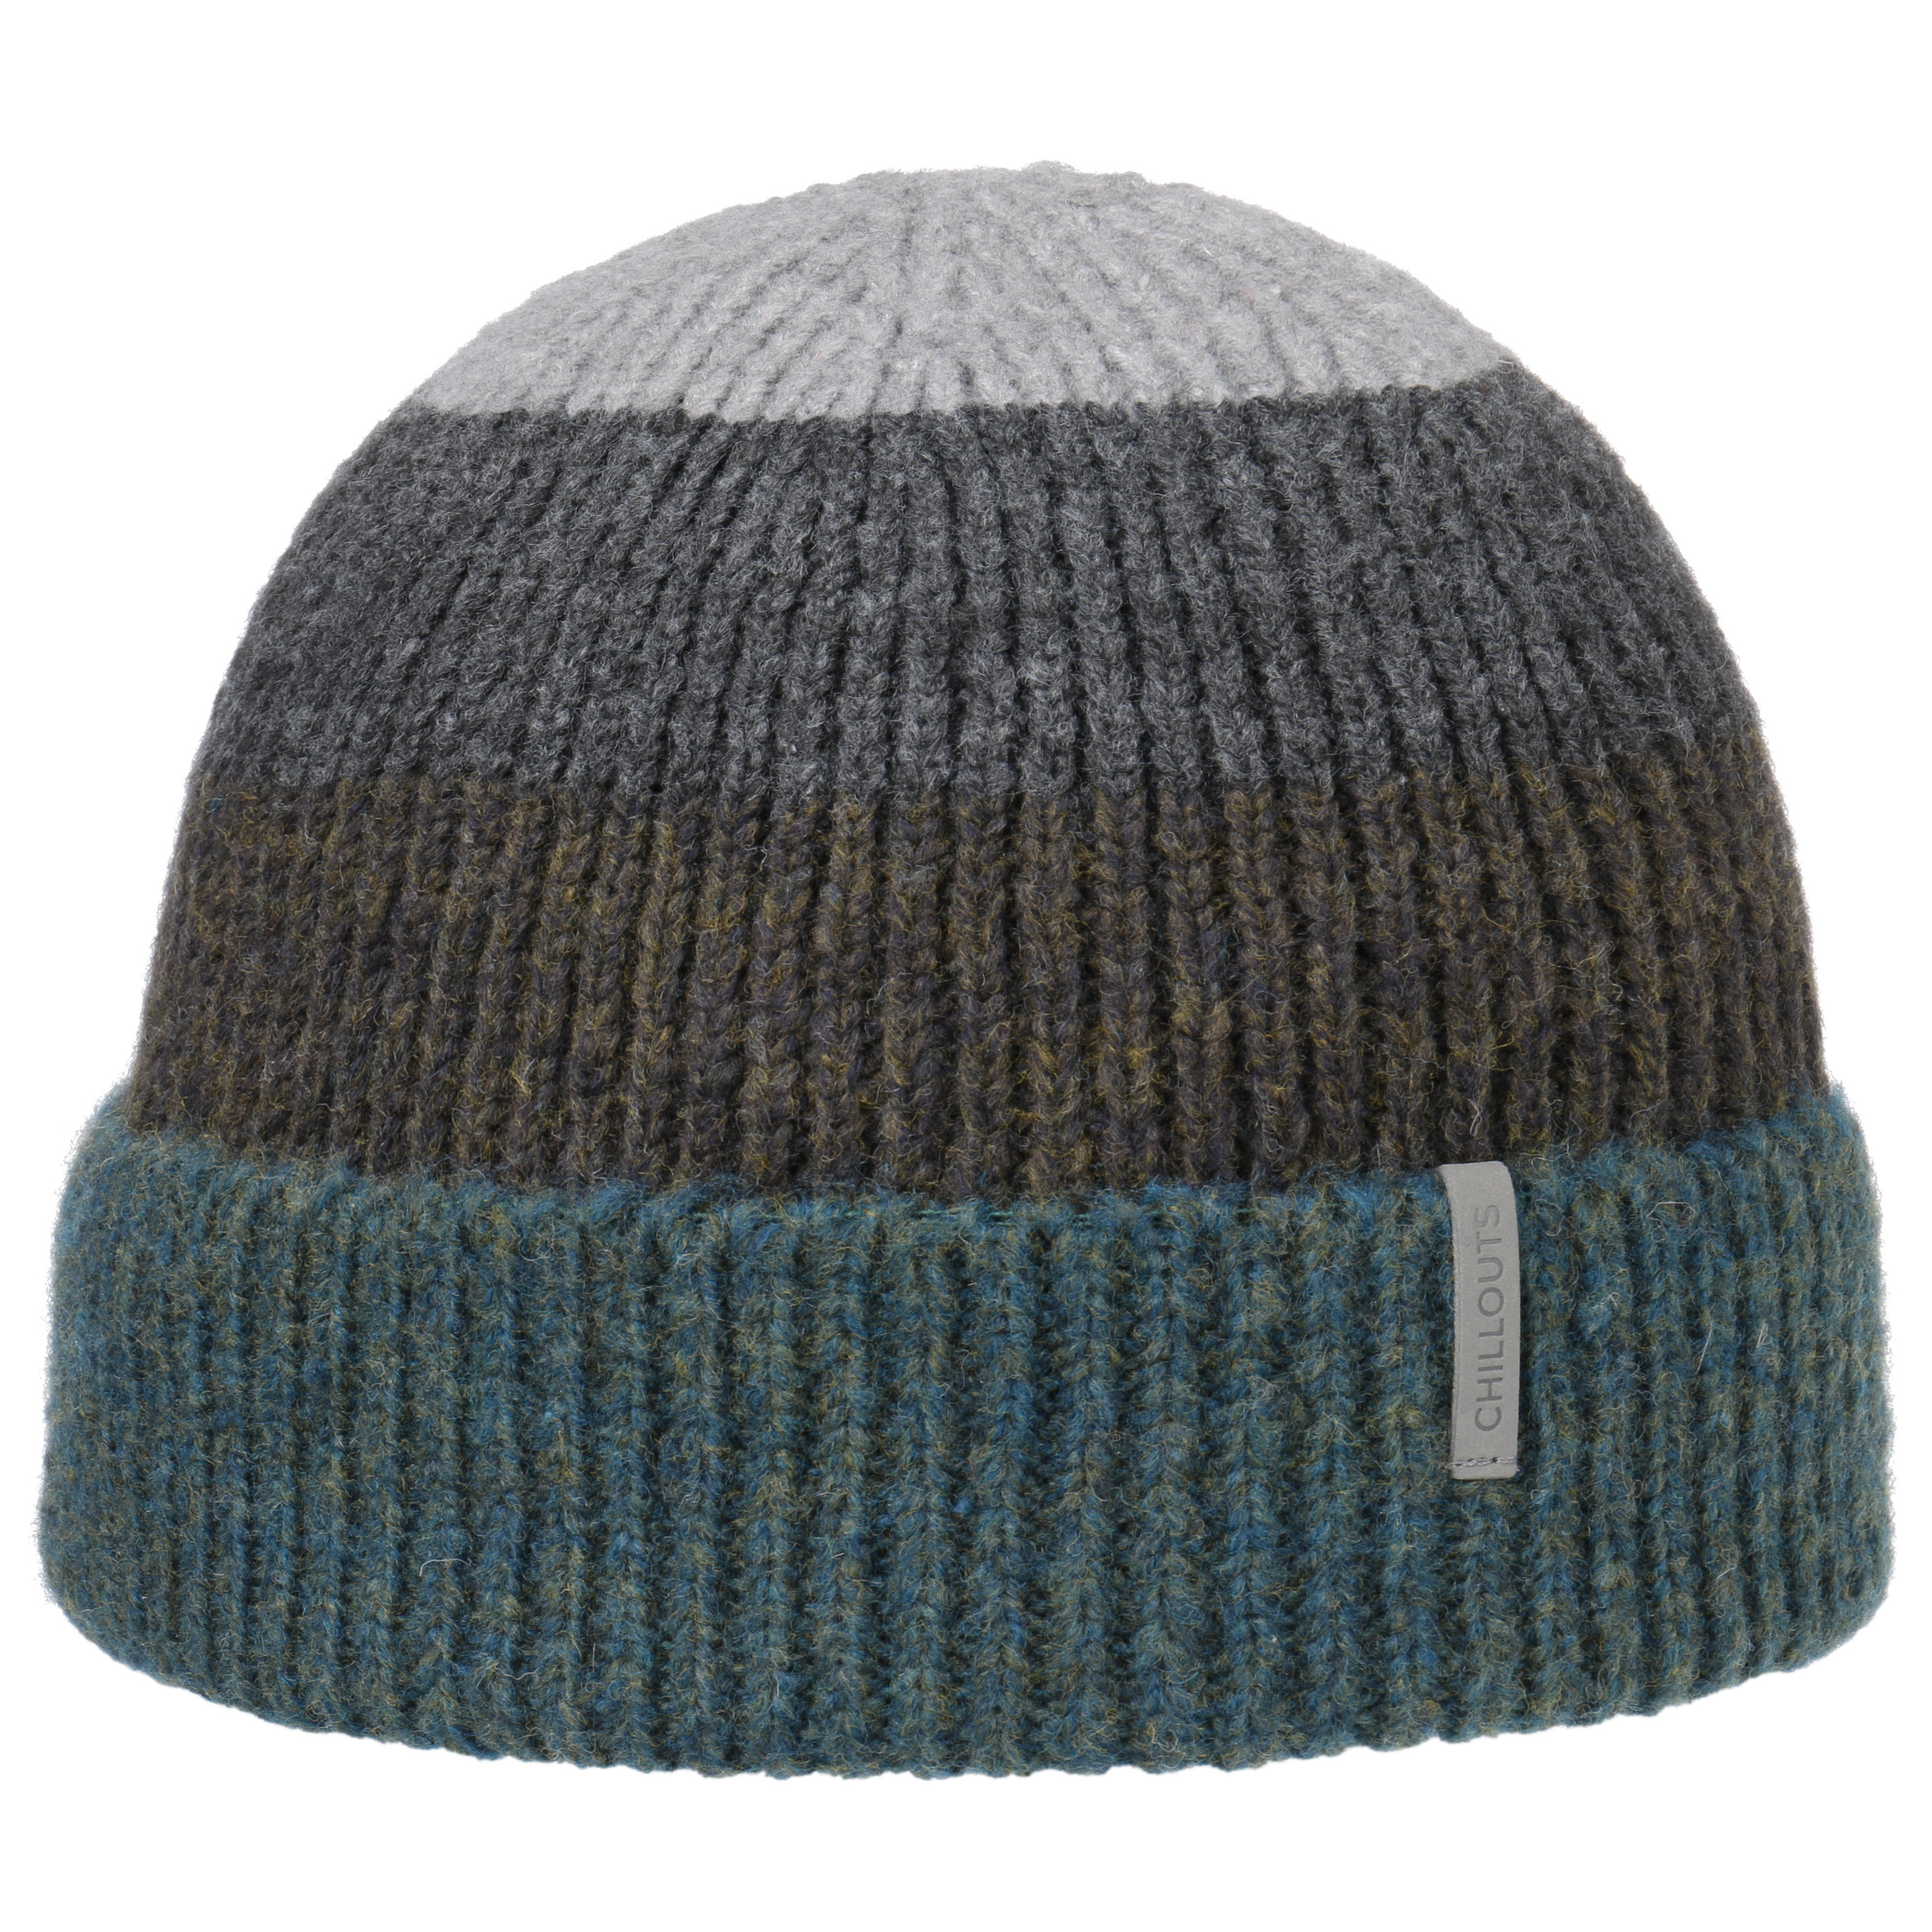 by Beanie € Chillouts - 24,99 Fritz